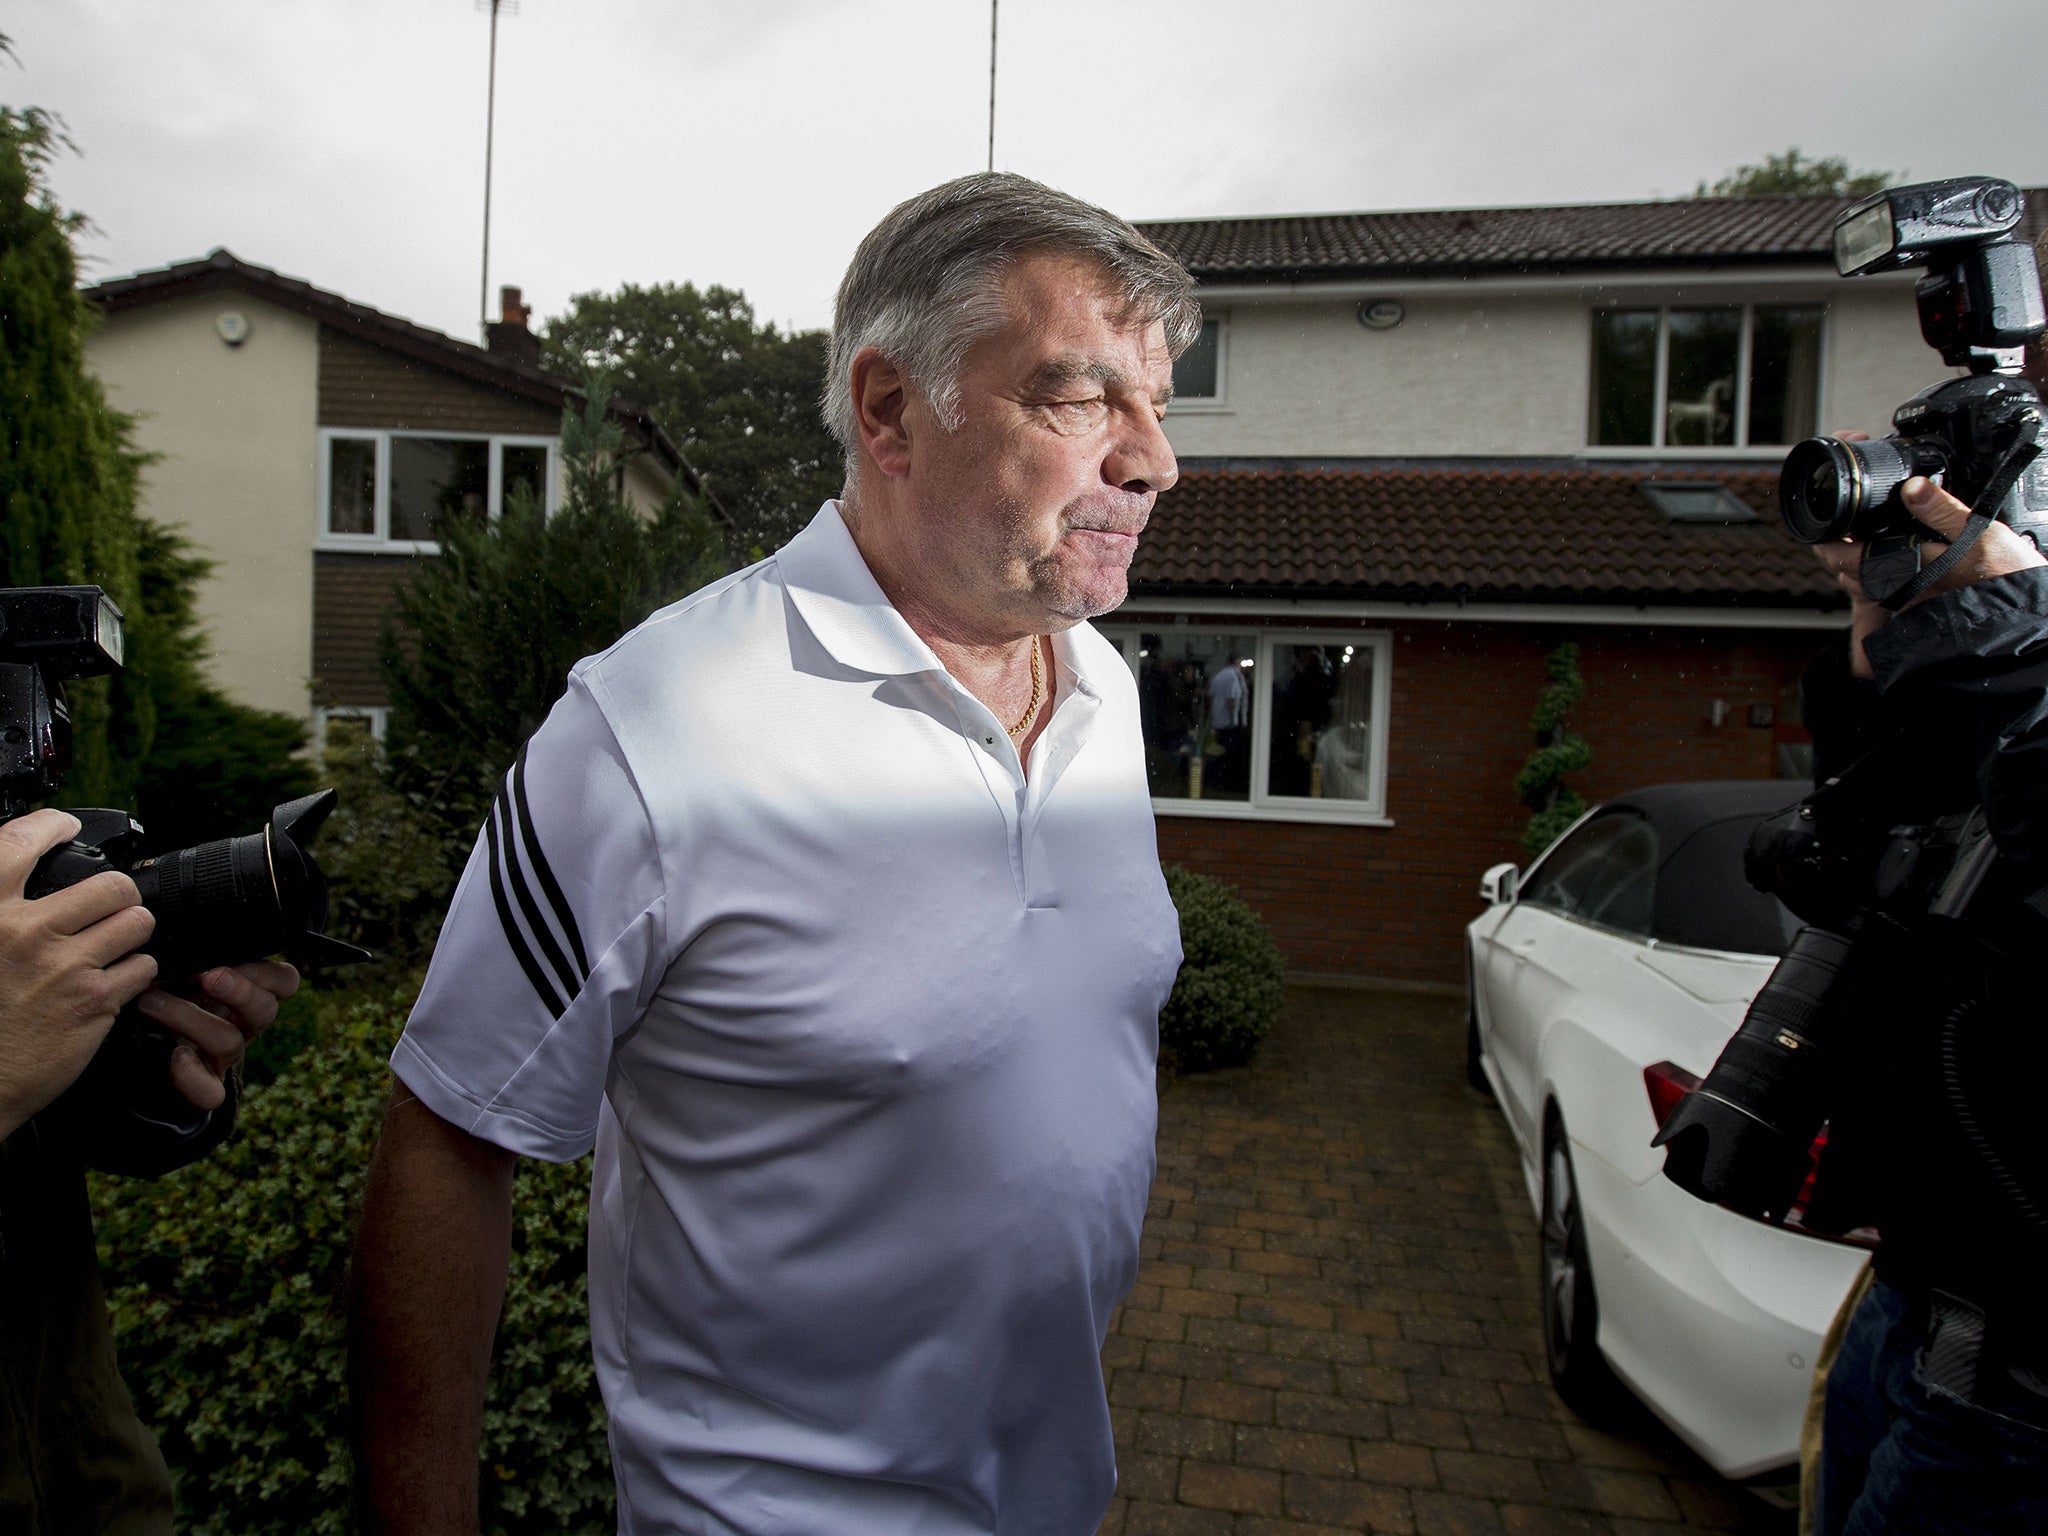 Allardyce was on the defensive when approached by reporters at his home